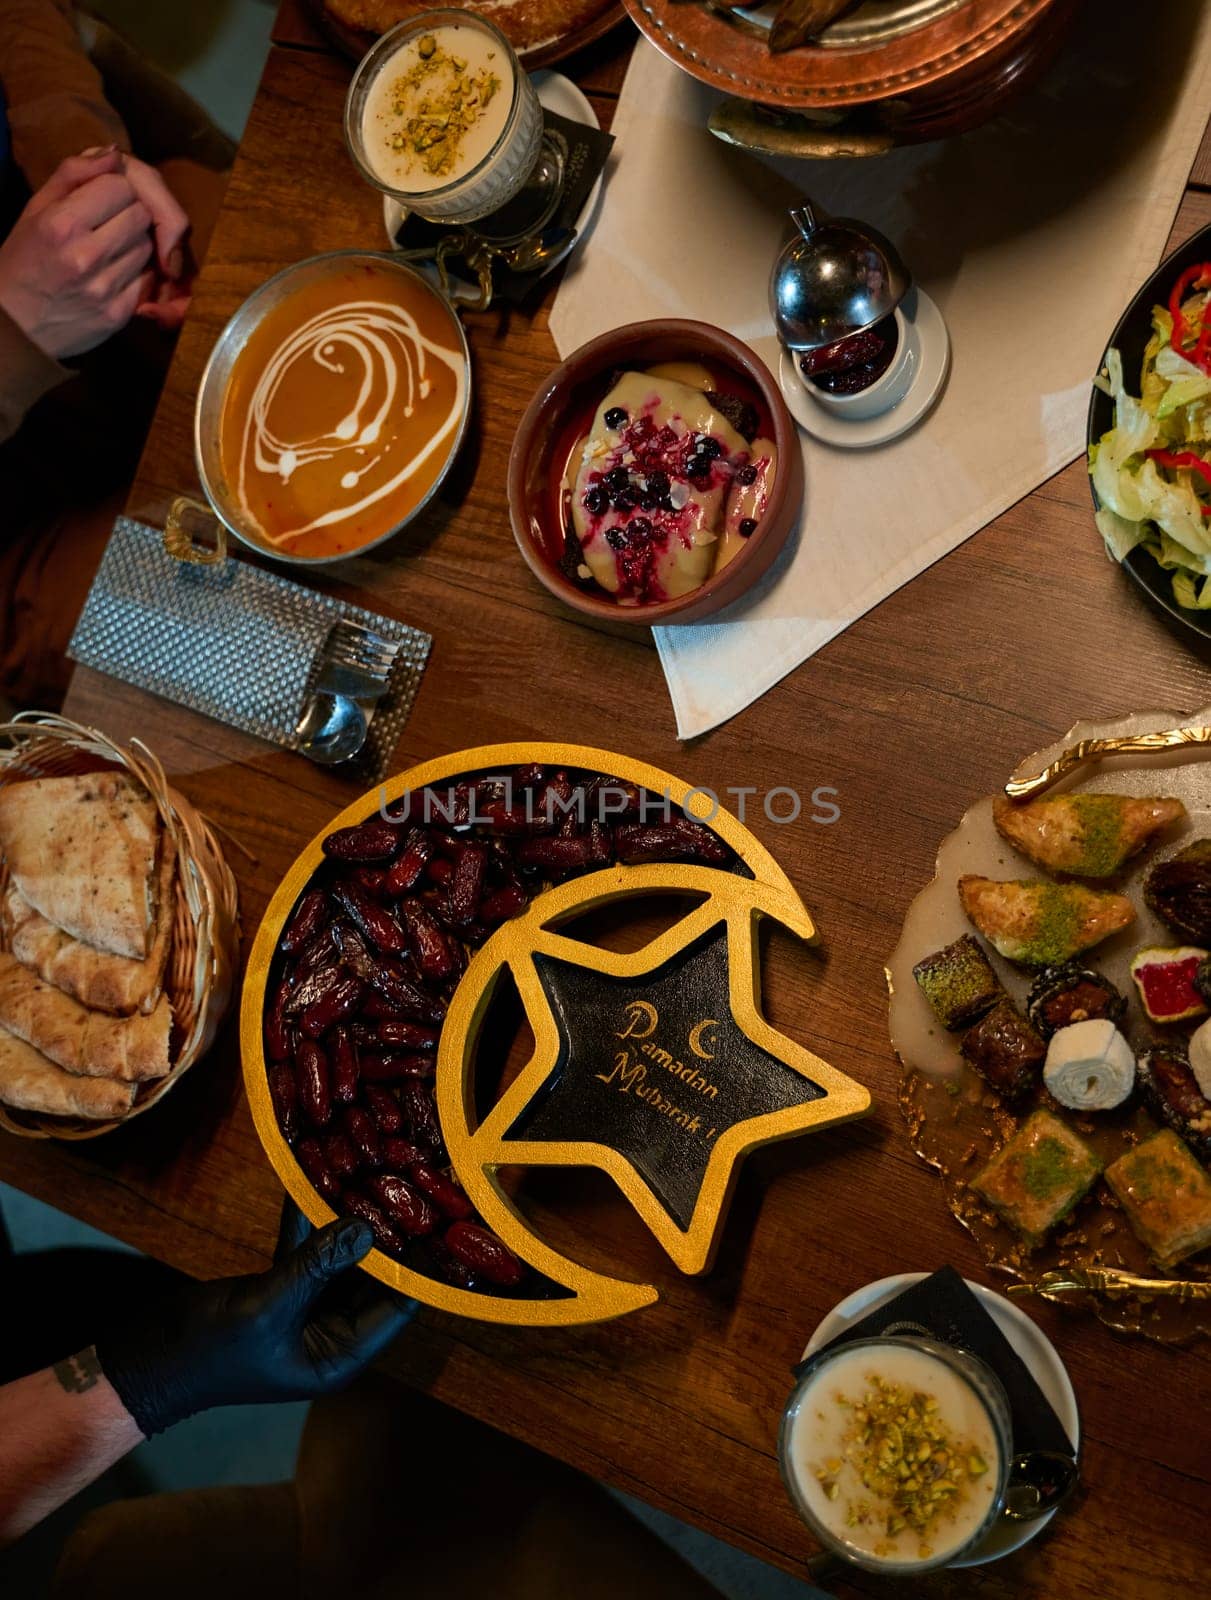 In this captivating aerial view, delicious food adorned with Ramadan decorations, including dates and meat, awaits the arrival of an European Islamic family, promising a festive and flavorful iftar celebration.